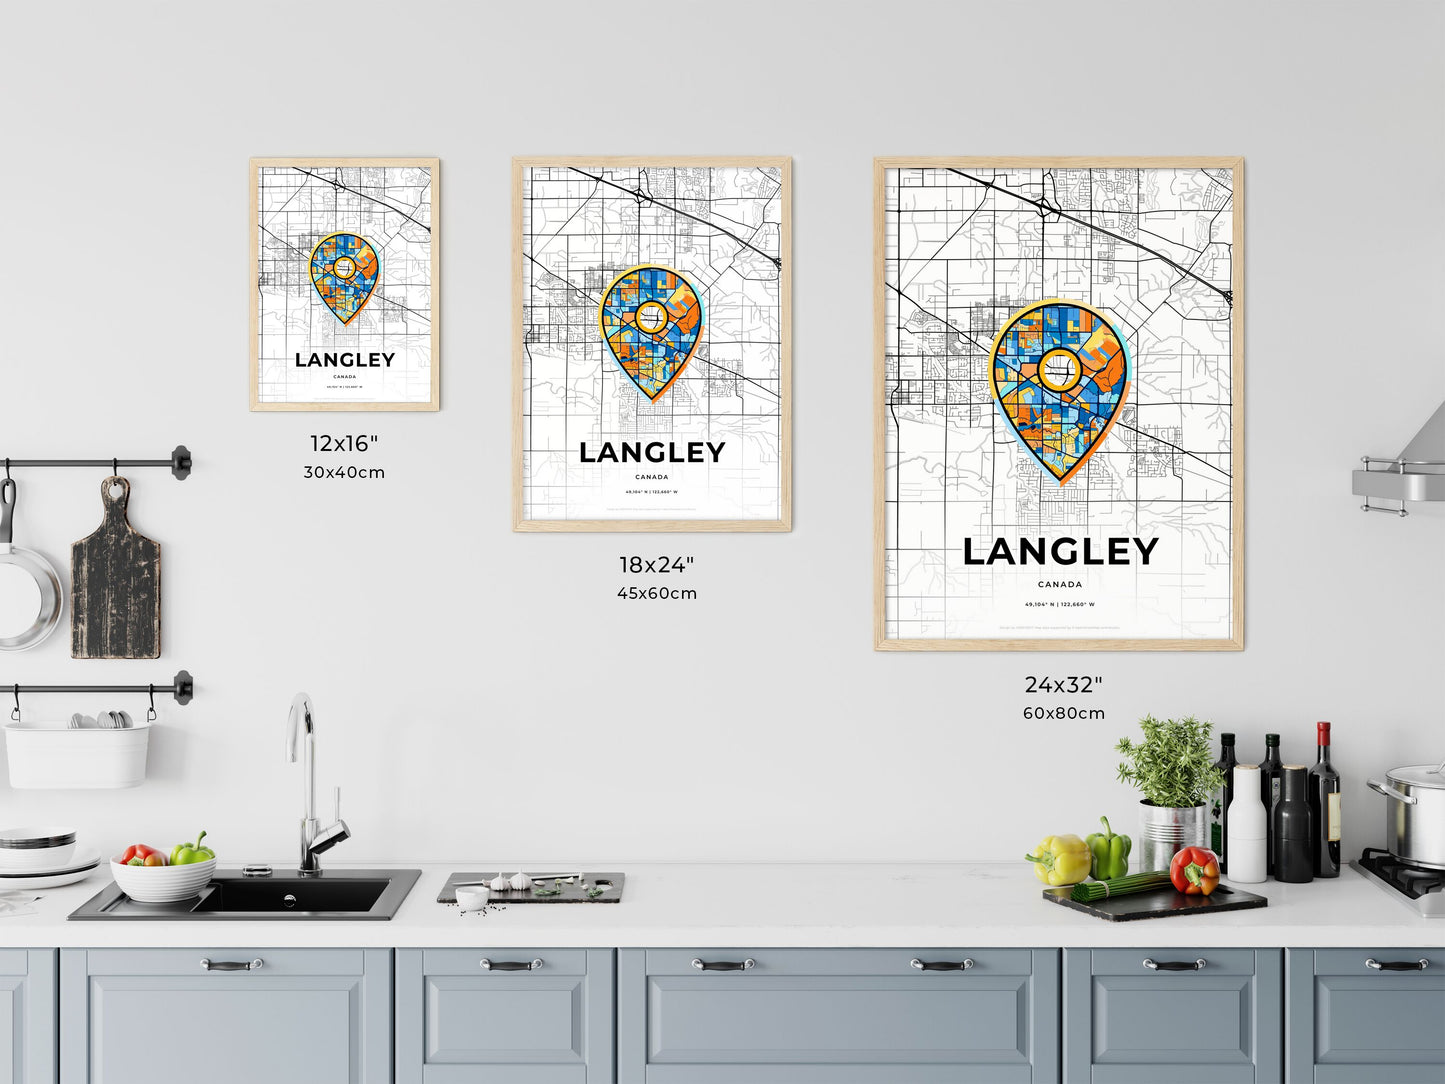 LANGLEY CANADA minimal art map with a colorful icon. Where it all began, Couple map gift.